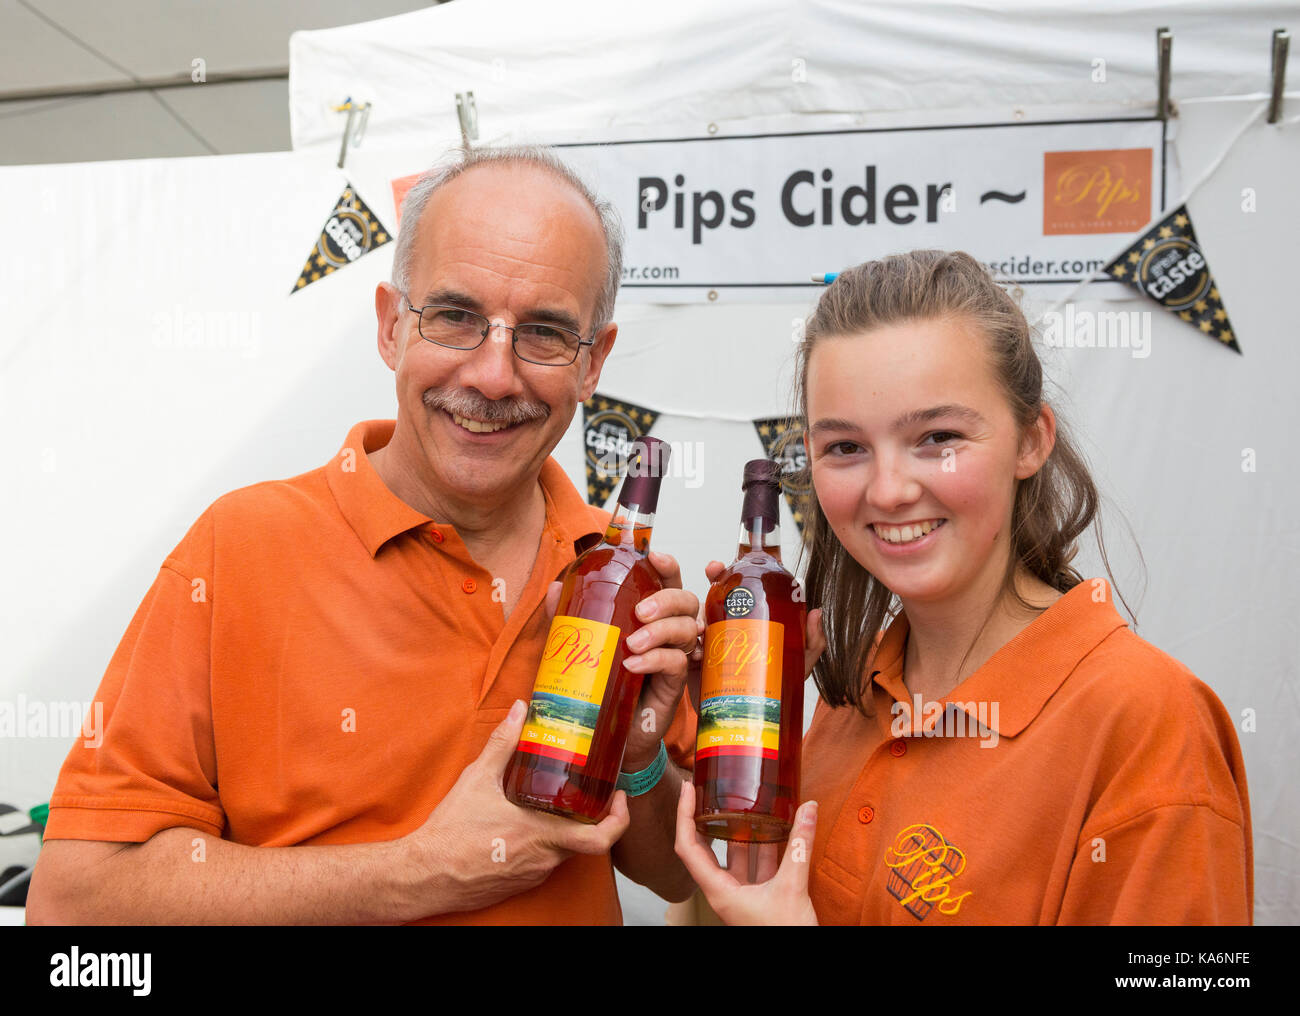 Pips Cider, Ludlow 2017 Food Festival. Stock Photo